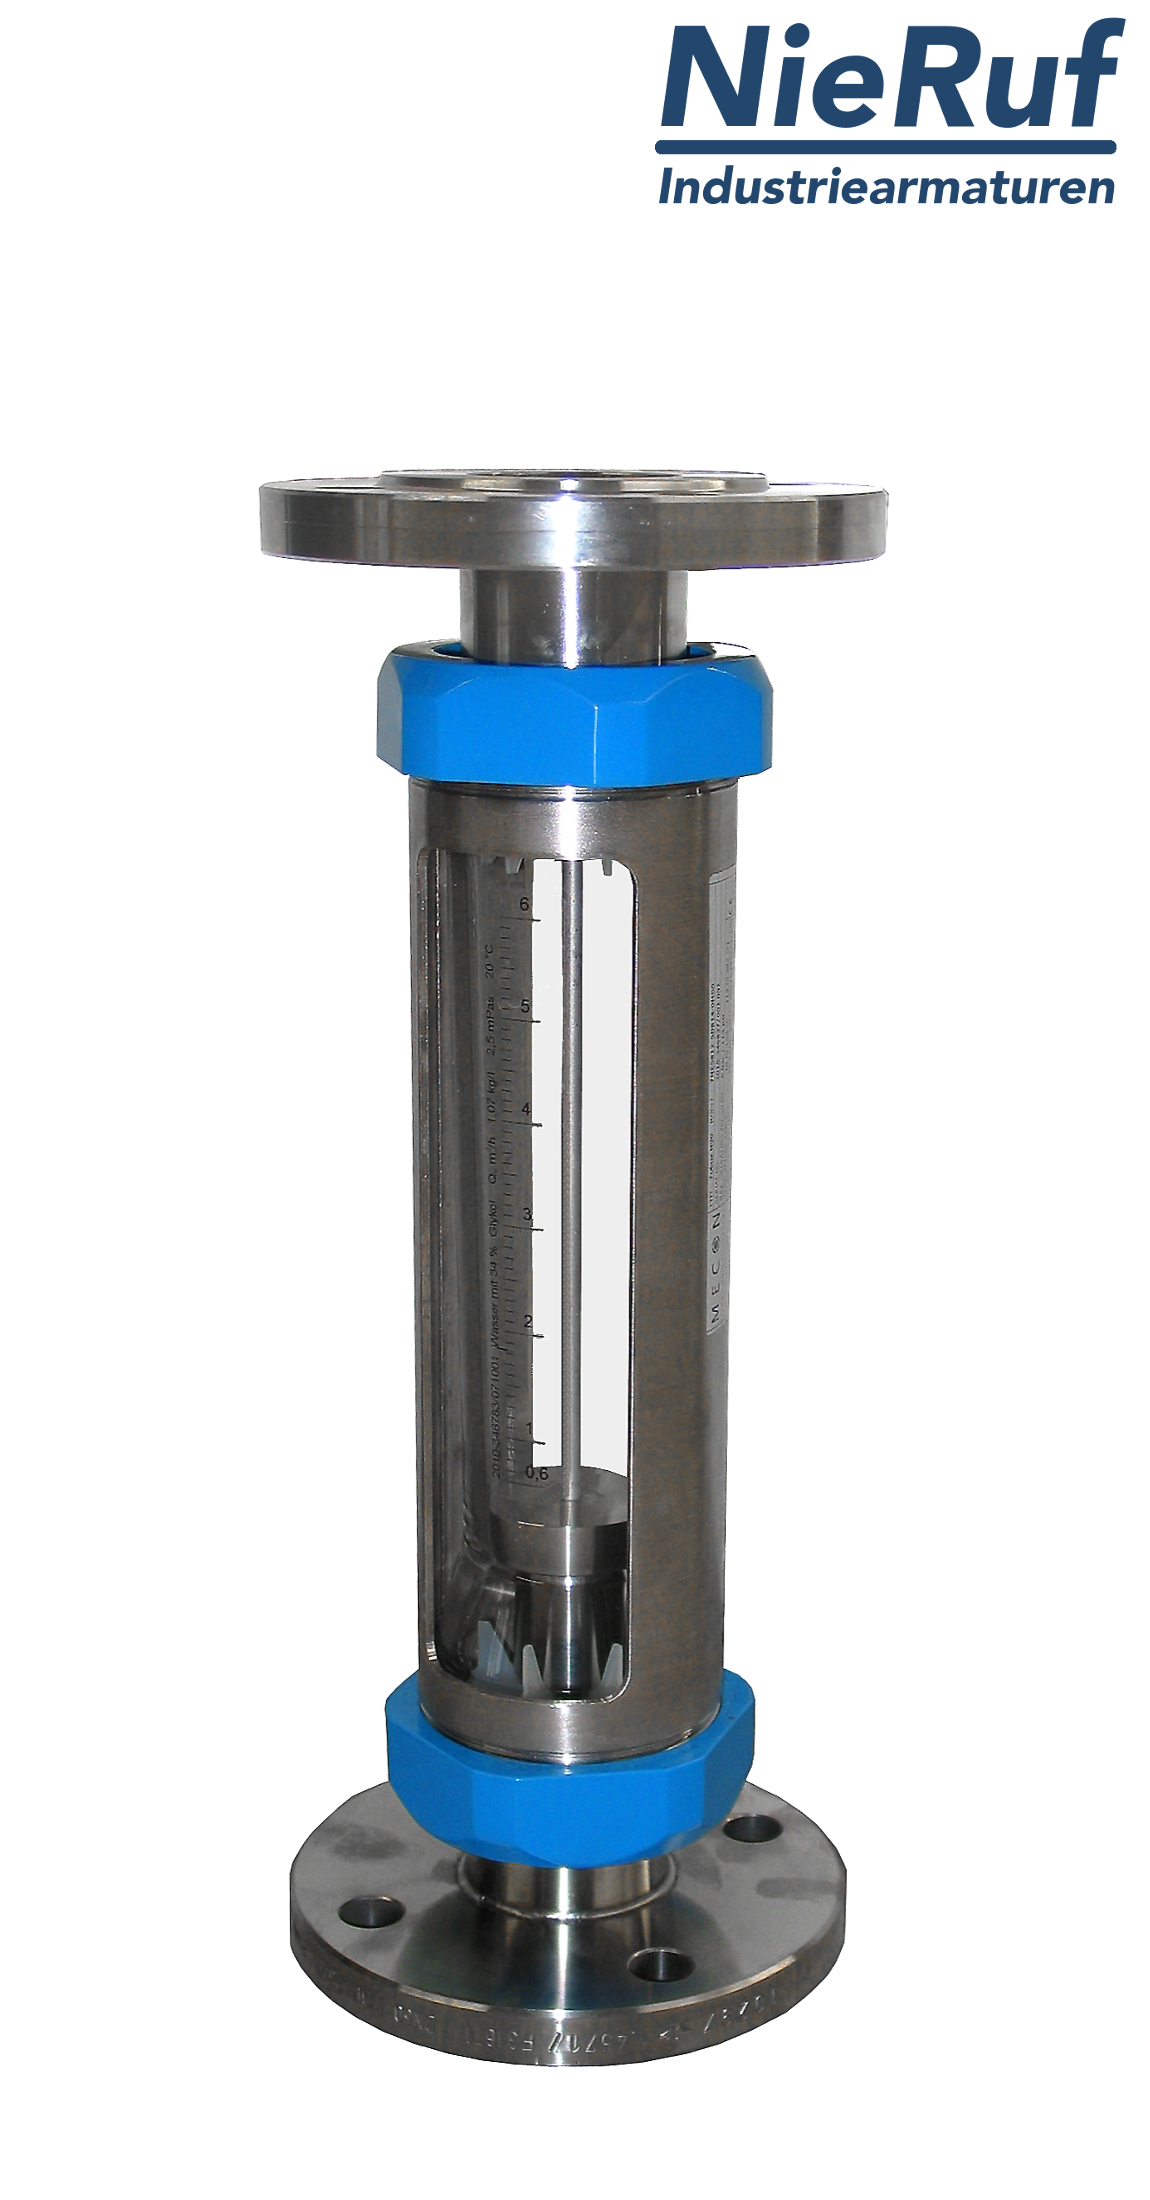 Variable area flowmeter stainless steel + borosilicate flange DN15 2.5 - 25.0 l/h water FKM